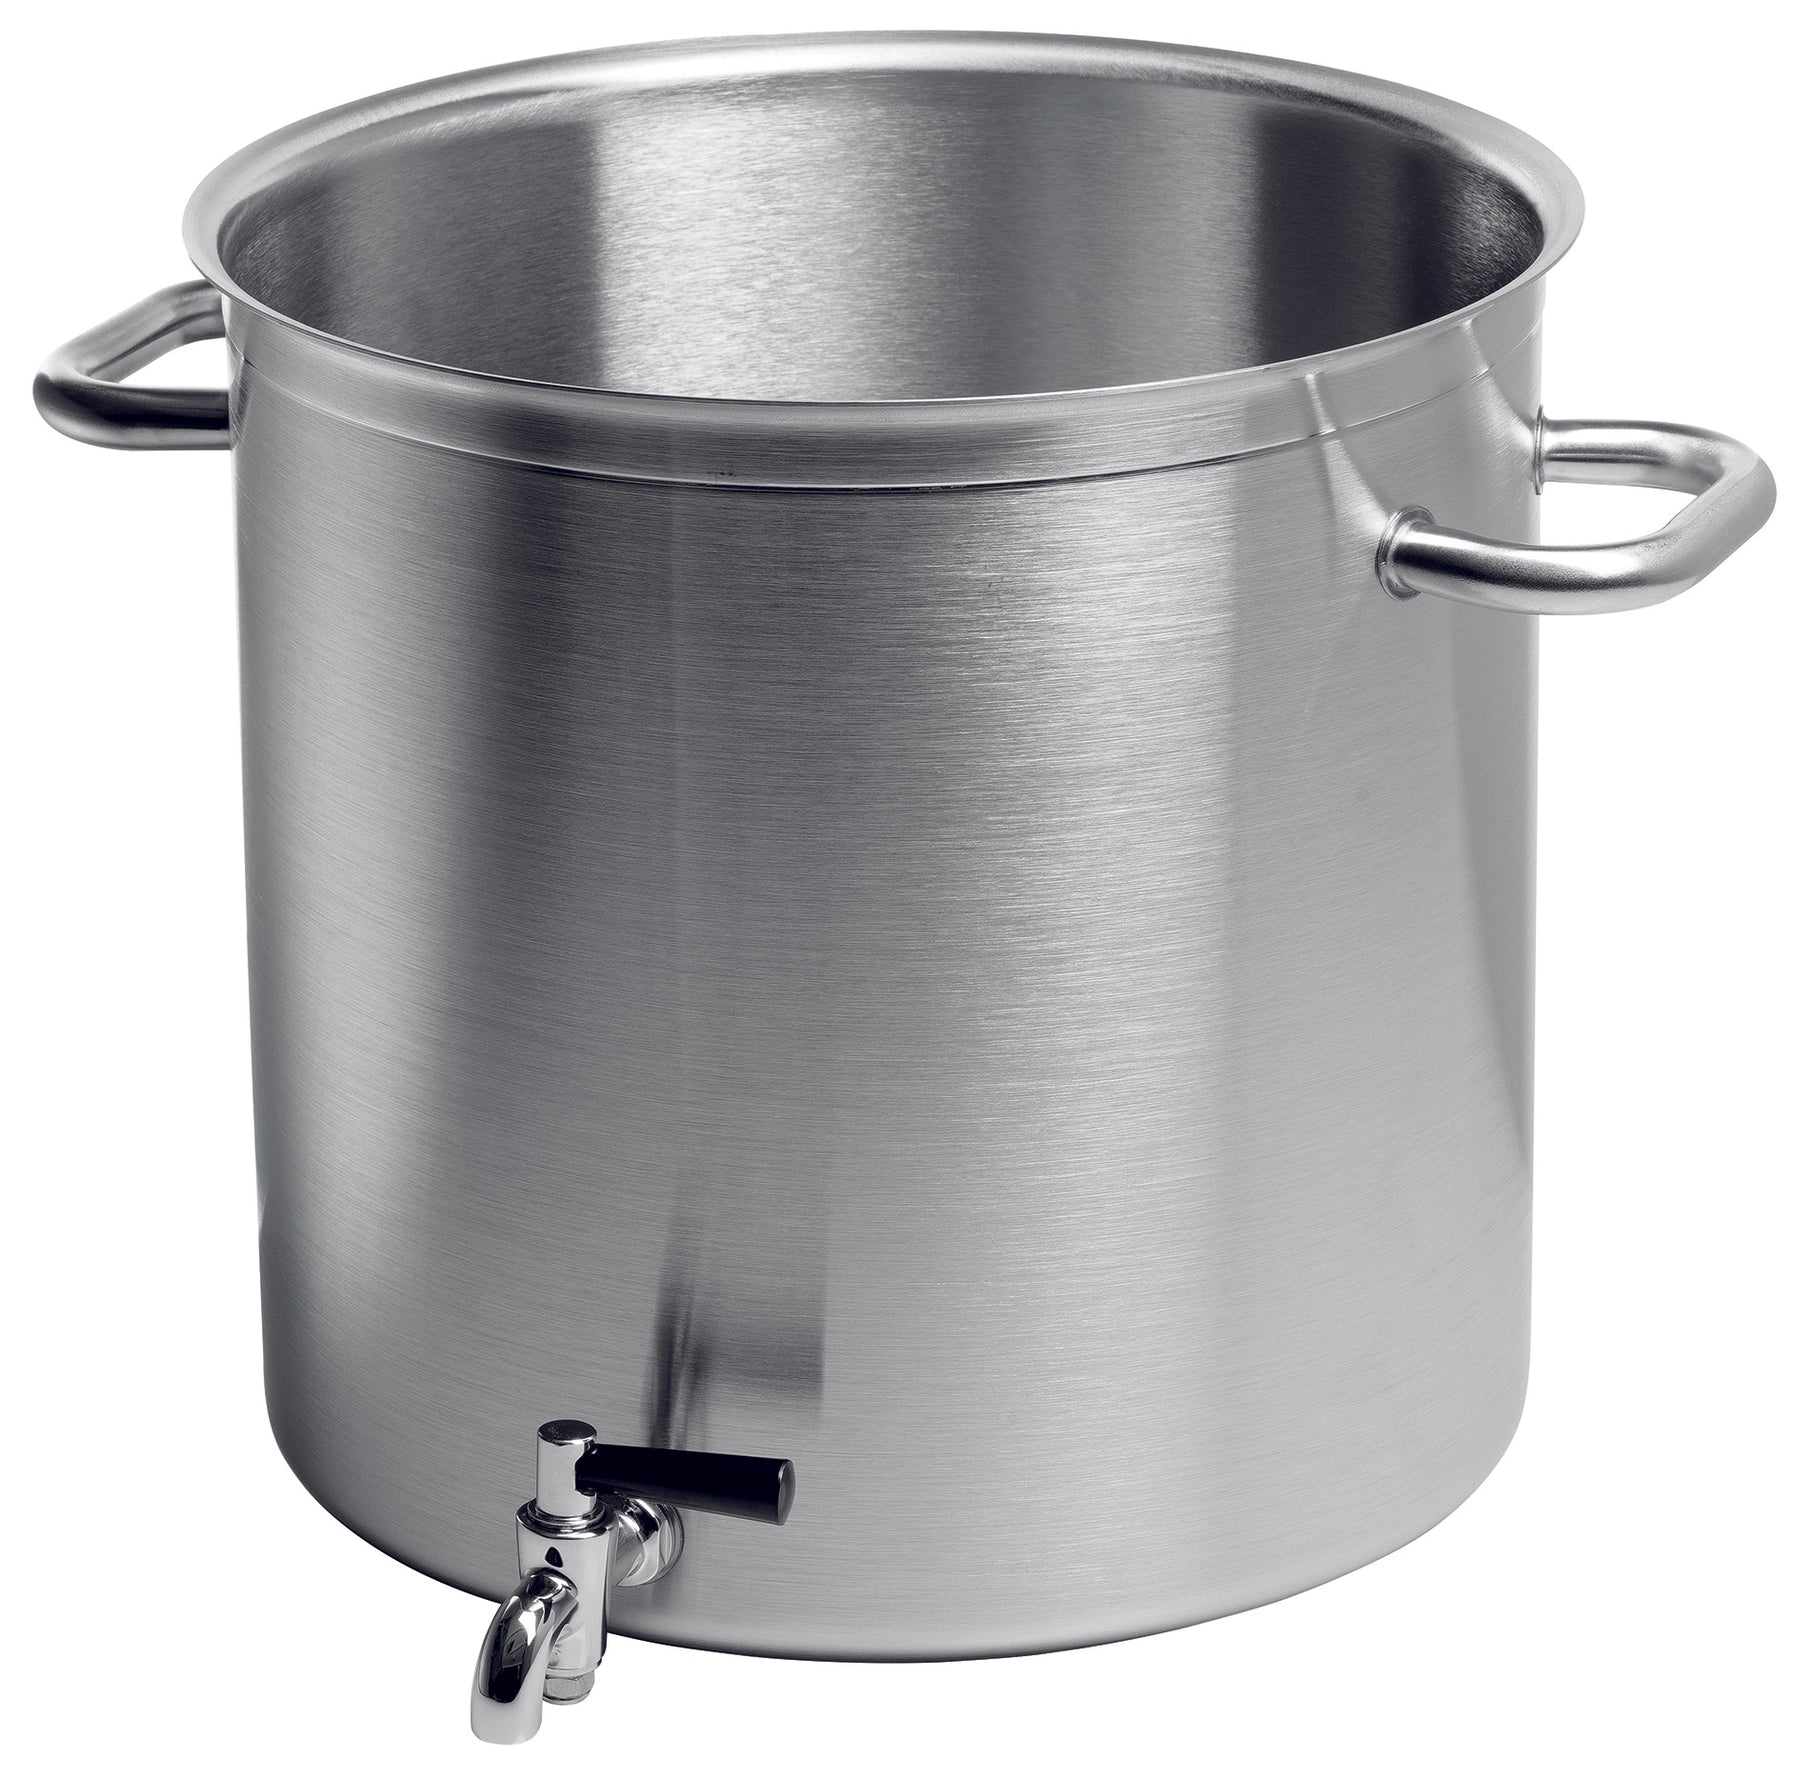 <img src="Item_694324.jpg?v=1557245896 " alt="Excellence Stockpot With Tap Without Lid  Matfer Bourgeat catalog"> 